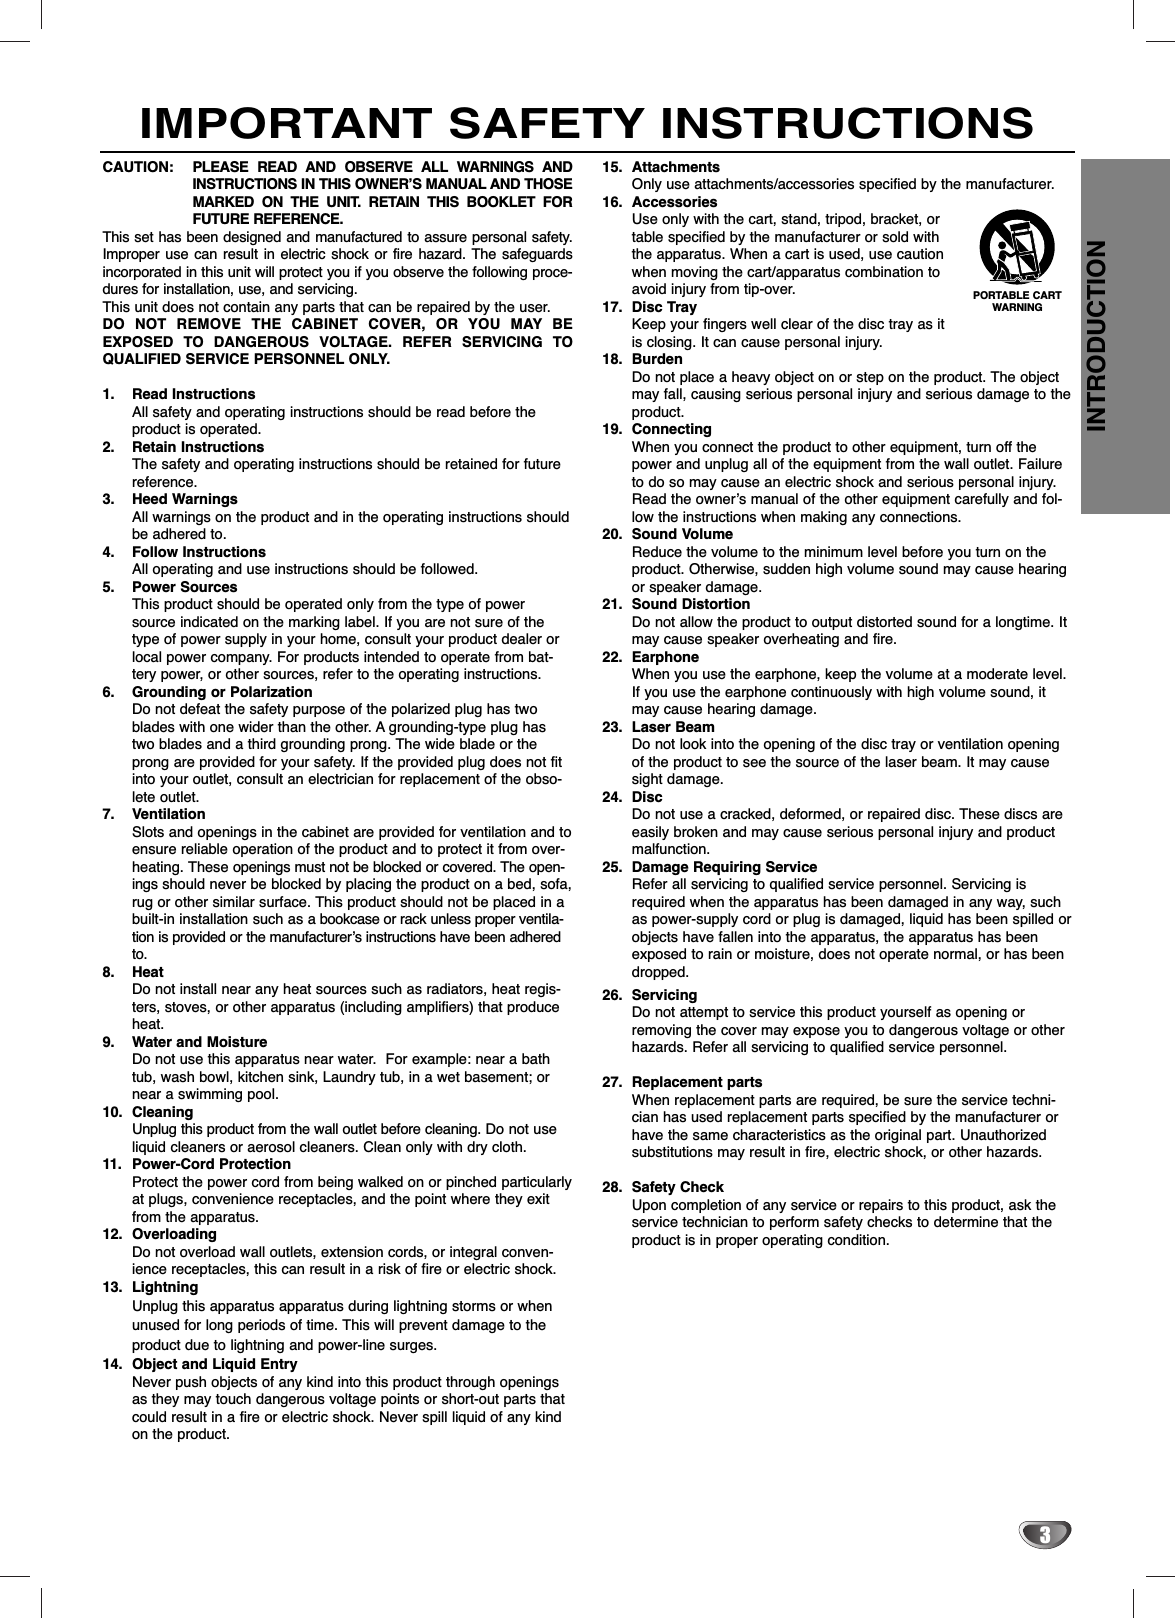 INTRODUCTION3IMPORTANT SAFETY INSTRUCTIONSCAUTION: PLEASE READ AND OBSERVE ALL WARNINGS ANDINSTRUCTIONS IN THIS OWNER’S MANUAL AND THOSEMARKED ON THE UNIT. RETAIN THIS BOOKLET FORFUTURE REFERENCE.This set has been designed and manufactured to assure personal safety.Improper use can result in electric shock or fire hazard. The safeguardsincorporated in this unit will protect you if you observe the following proce-dures for installation, use, and servicing.This unit does not contain any parts that can be repaired by the user.DO NOT REMOVE THE CABINET COVER, OR YOU MAY BEEXPOSED TO DANGEROUS VOLTAGE. REFER SERVICING TOQUALIFIED SERVICE PERSONNEL ONLY.1. Read InstructionsAll safety and operating instructions should be read before theproduct is operated. 2. Retain InstructionsThe safety and operating instructions should be retained for futurereference.3. Heed WarningsAll warnings on the product and in the operating instructions shouldbe adhered to.4. Follow InstructionsAll operating and use instructions should be followed.5. Power SourcesThis product should be operated only from the type of powersource indicated on the marking label. If you are not sure of thetype of power supply in your home, consult your product dealer orlocal power company. For products intended to operate from bat-tery power, or other sources, refer to the operating instructions.6. Grounding or PolarizationDo not defeat the safety purpose of the polarized plug has twoblades with one wider than the other. A grounding-type plug hastwo blades and a third grounding prong. The wide blade or theprong are provided for your safety. If the provided plug does not fitinto your outlet, consult an electrician for replacement of the obso-lete outlet.7. VentilationSlots and openings in the cabinet are provided for ventilation and toensure reliable operation of the product and to protect it from over-heating. These openings must not be blocked or covered. The open-ings should never be blocked by placing the product on a bed, sofa,rug or other similar surface. This product should not be placed in abuilt-in installation such as a bookcase or rack unless proper ventila-tion is provided or the manufacturer’s instructions have been adheredto.8. HeatDo not install near any heat sources such as radiators, heat regis-ters, stoves, or other apparatus (including amplifiers) that produceheat.9. Water and MoistureDo not use this apparatus near water.  For example: near a bathtub, wash bowl, kitchen sink, Laundry tub, in a wet basement; ornear a swimming pool.10. CleaningUnplug this product from the wall outlet before cleaning. Do not useliquid cleaners or aerosol cleaners. Clean only with dry cloth.11. Power-Cord ProtectionProtect the power cord from being walked on or pinched particularlyat plugs, convenience receptacles, and the point where they exitfrom the apparatus.12. OverloadingDo not overload wall outlets, extension cords, or integral conven-ience receptacles, this can result in a risk of fire or electric shock.13. LightningUnplug this apparatus apparatus during lightning storms or whenunused for long periods of time. This will prevent damage to theproduct due to lightning and power-line surges.14. Object and Liquid EntryNever push objects of any kind into this product through openingsas they may touch dangerous voltage points or short-out parts thatcould result in a fire or electric shock. Never spill liquid of any kindon the product.15. AttachmentsOnly use attachments/accessories specified by the manufacturer.16. AccessoriesUse only with the cart, stand, tripod, bracket, ortable specified by the manufacturer or sold withthe apparatus. When a cart is used, use cautionwhen moving the cart/apparatus combination toavoid injury from tip-over. 17. Disc TrayKeep your fingers well clear of the disc tray as itis closing. It can cause personal injury.18. BurdenDo not place a heavy object on or step on the product. The objectmay fall, causing serious personal injury and serious damage to theproduct.19. ConnectingWhen you connect the product to other equipment, turn off thepower and unplug all of the equipment from the wall outlet. Failureto do so may cause an electric shock and serious personal injury.Read the owner’s manual of the other equipment carefully and fol-low the instructions when making any connections.20. Sound VolumeReduce the volume to the minimum level before you turn on theproduct. Otherwise, sudden high volume sound may cause hearingor speaker damage.21. Sound DistortionDo not allow the product to output distorted sound for a longtime. Itmay cause speaker overheating and fire.22. EarphoneWhen you use the earphone, keep the volume at a moderate level.If you use the earphone continuously with high volume sound, itmay cause hearing damage.23. Laser BeamDo not look into the opening of the disc tray or ventilation openingof the product to see the source of the laser beam. It may causesight damage.24. DiscDo not use a cracked, deformed, or repaired disc. These discs areeasily broken and may cause serious personal injury and productmalfunction.25. Damage Requiring ServiceRefer all servicing to qualified service personnel. Servicing isrequired when the apparatus has been damaged in any way, suchas power-supply cord or plug is damaged, liquid has been spilled orobjects have fallen into the apparatus, the apparatus has beenexposed to rain or moisture, does not operate normal, or has beendropped.26. ServicingDo not attempt to service this product yourself as opening orremoving the cover may expose you to dangerous voltage or otherhazards. Refer all servicing to qualified service personnel.27. Replacement partsWhen replacement parts are required, be sure the service techni-cian has used replacement parts specified by the manufacturer orhave the same characteristics as the original part. Unauthorizedsubstitutions may result in fire, electric shock, or other hazards.28. Safety CheckUpon completion of any service or repairs to this product, ask theservice technician to perform safety checks to determine that theproduct is in proper operating condition.PORTABLE CARTWARNING